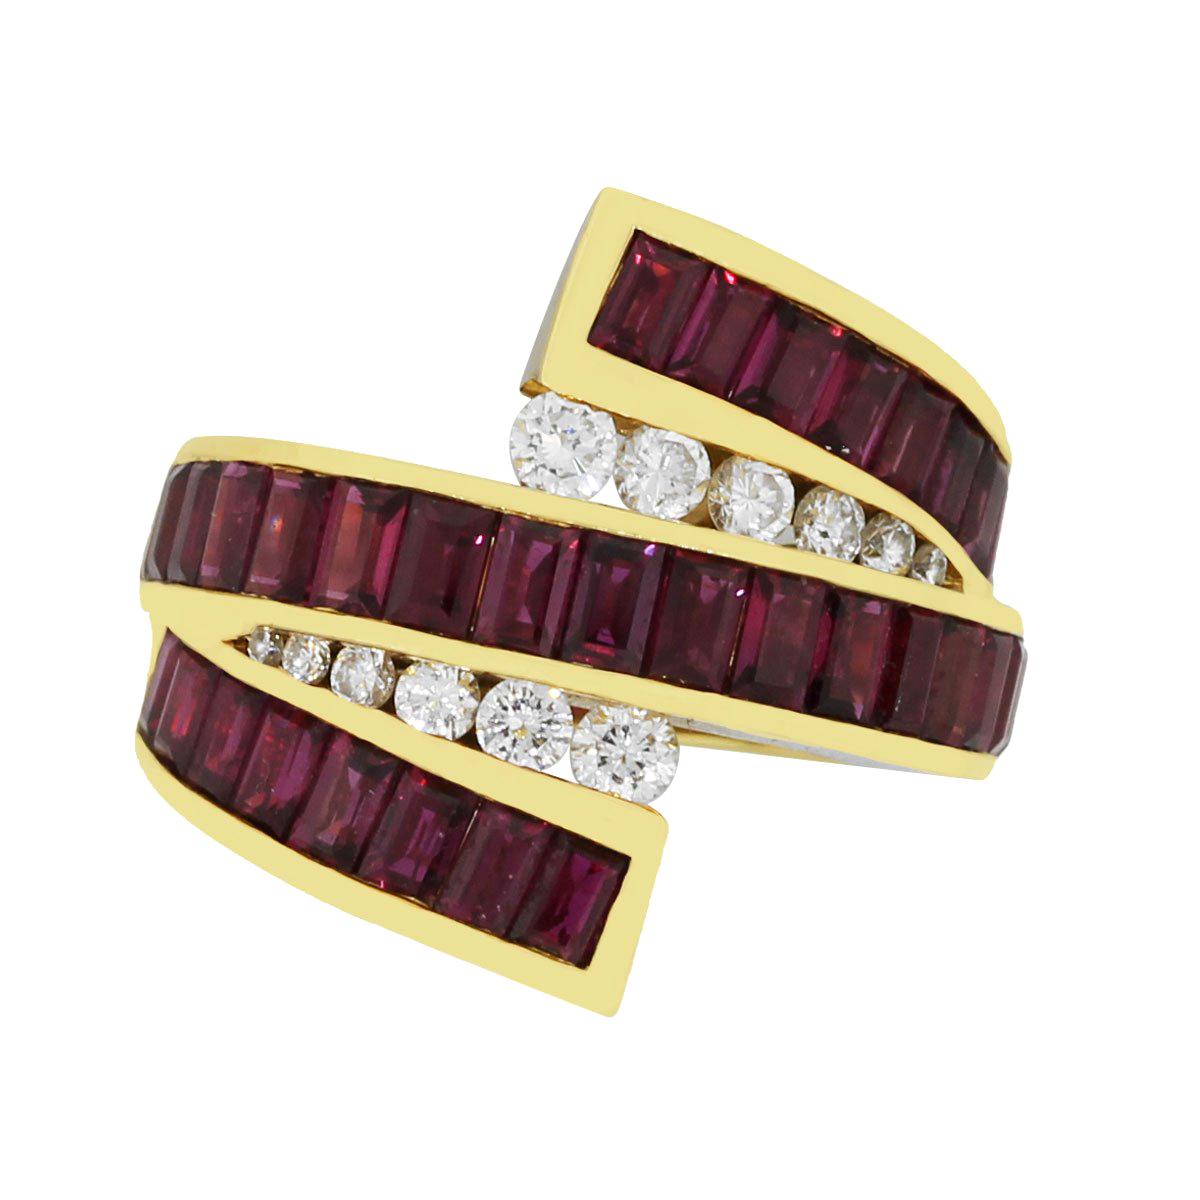 Charles Krypell Ruby and Diamond Ring